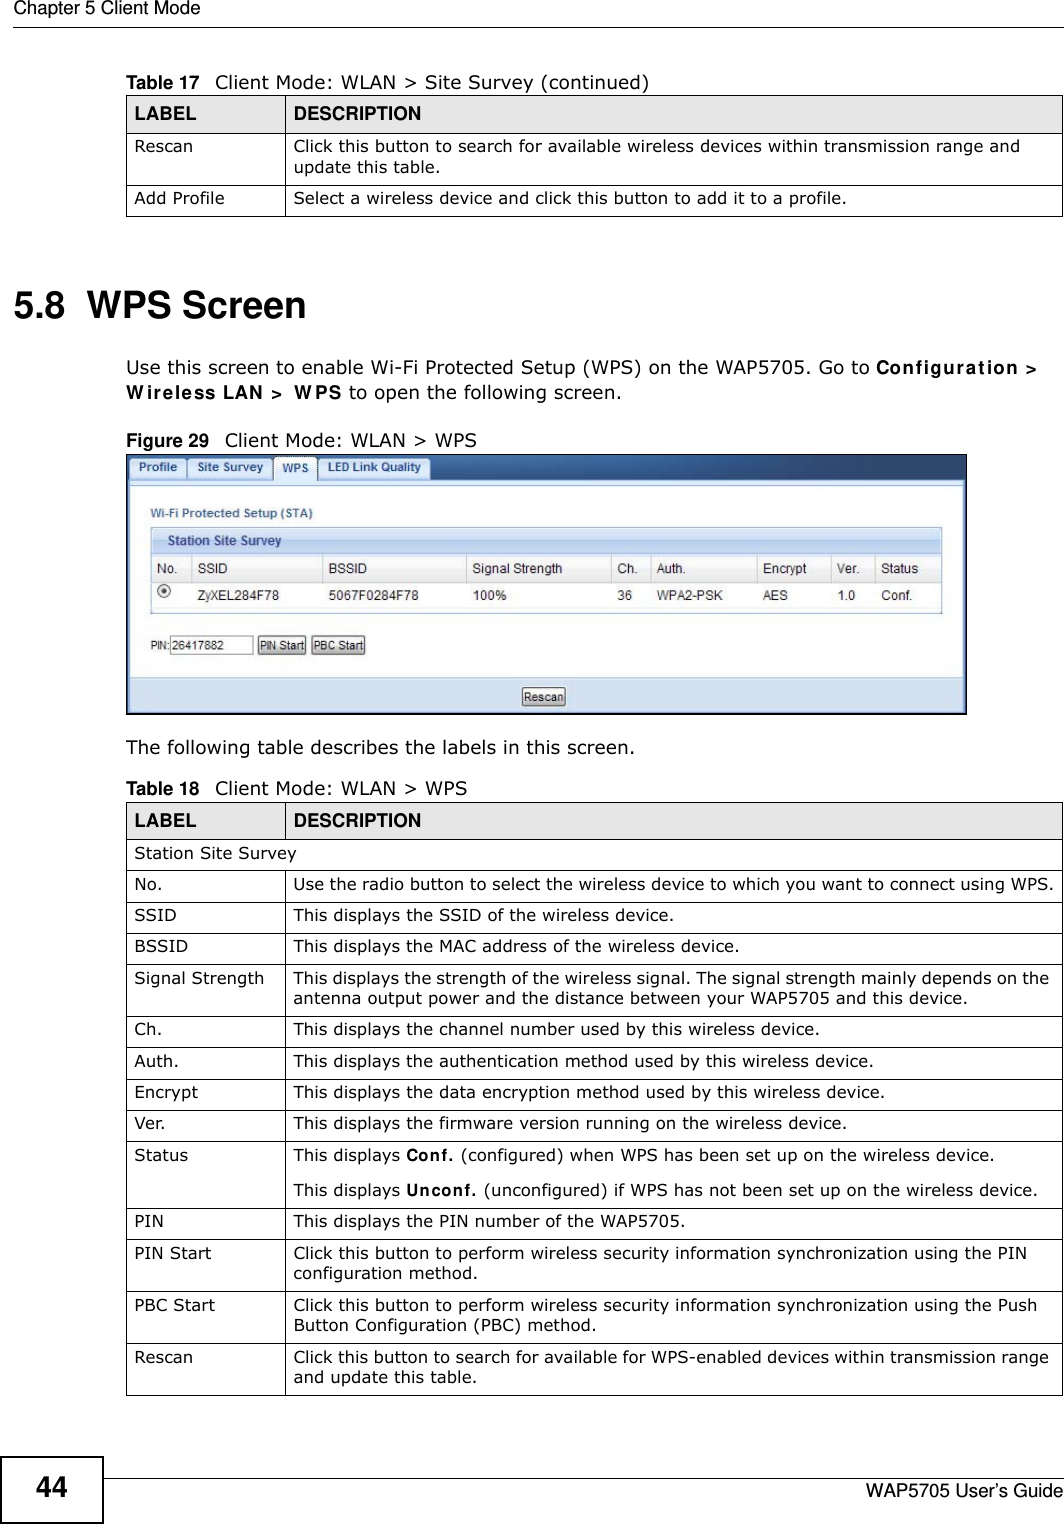 Chapter 5 Client ModeWAP5705 User’s Guide445.8  WPS ScreenUse this screen to enable Wi-Fi Protected Setup (WPS) on the WAP5705. Go to Configur a t ion &gt;  W ire less LAN  &gt;  W PS to open the following screen.Figure 29   Client Mode: WLAN &gt; WPS The following table describes the labels in this screen. Rescan Click this button to search for available wireless devices within transmission range and update this table.Add Profile Select a wireless device and click this button to add it to a profile.Table 17   Client Mode: WLAN &gt; Site Survey (continued)LABEL  DESCRIPTIONTable 18   Client Mode: WLAN &gt; WPSLABEL  DESCRIPTIONStation Site SurveyNo. Use the radio button to select the wireless device to which you want to connect using WPS.SSID This displays the SSID of the wireless device.BSSID This displays the MAC address of the wireless device.Signal Strength This displays the strength of the wireless signal. The signal strength mainly depends on the antenna output power and the distance between your WAP5705 and this device.Ch. This displays the channel number used by this wireless device. Auth. This displays the authentication method used by this wireless device.Encrypt This displays the data encryption method used by this wireless device.Ver. This displays the firmware version running on the wireless device.Status This displays Conf. (configured) when WPS has been set up on the wireless device. This displays Uncon f. (unconfigured) if WPS has not been set up on the wireless device.PIN This displays the PIN number of the WAP5705.PIN Start Click this button to perform wireless security information synchronization using the PIN configuration method.PBC Start Click this button to perform wireless security information synchronization using the Push Button Configuration (PBC) method.Rescan Click this button to search for available for WPS-enabled devices within transmission range and update this table.